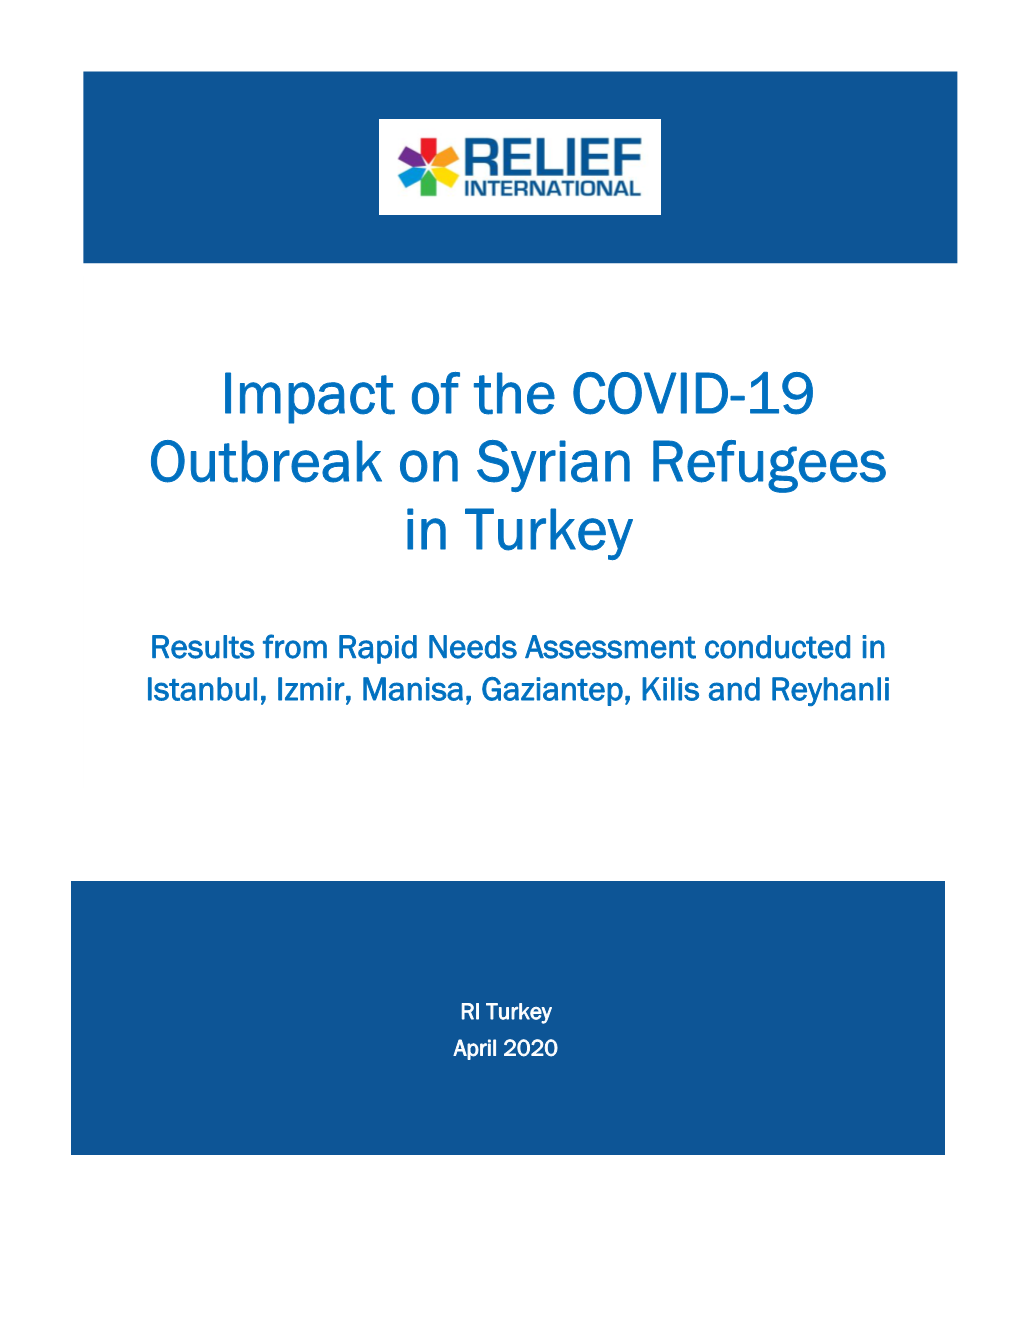 Impact of the COVID-19 Outbreak on Syrian Refugees in Turkey